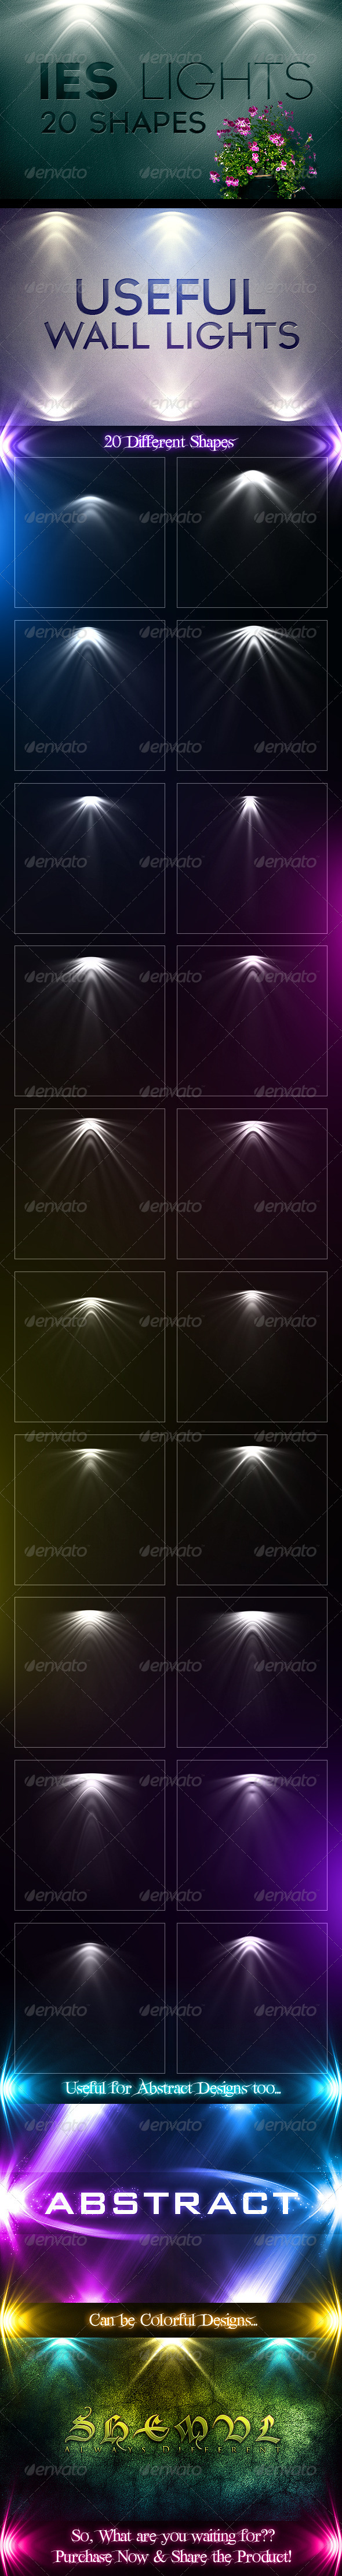 20 IES Light Effects by Shemul | GraphicRiver